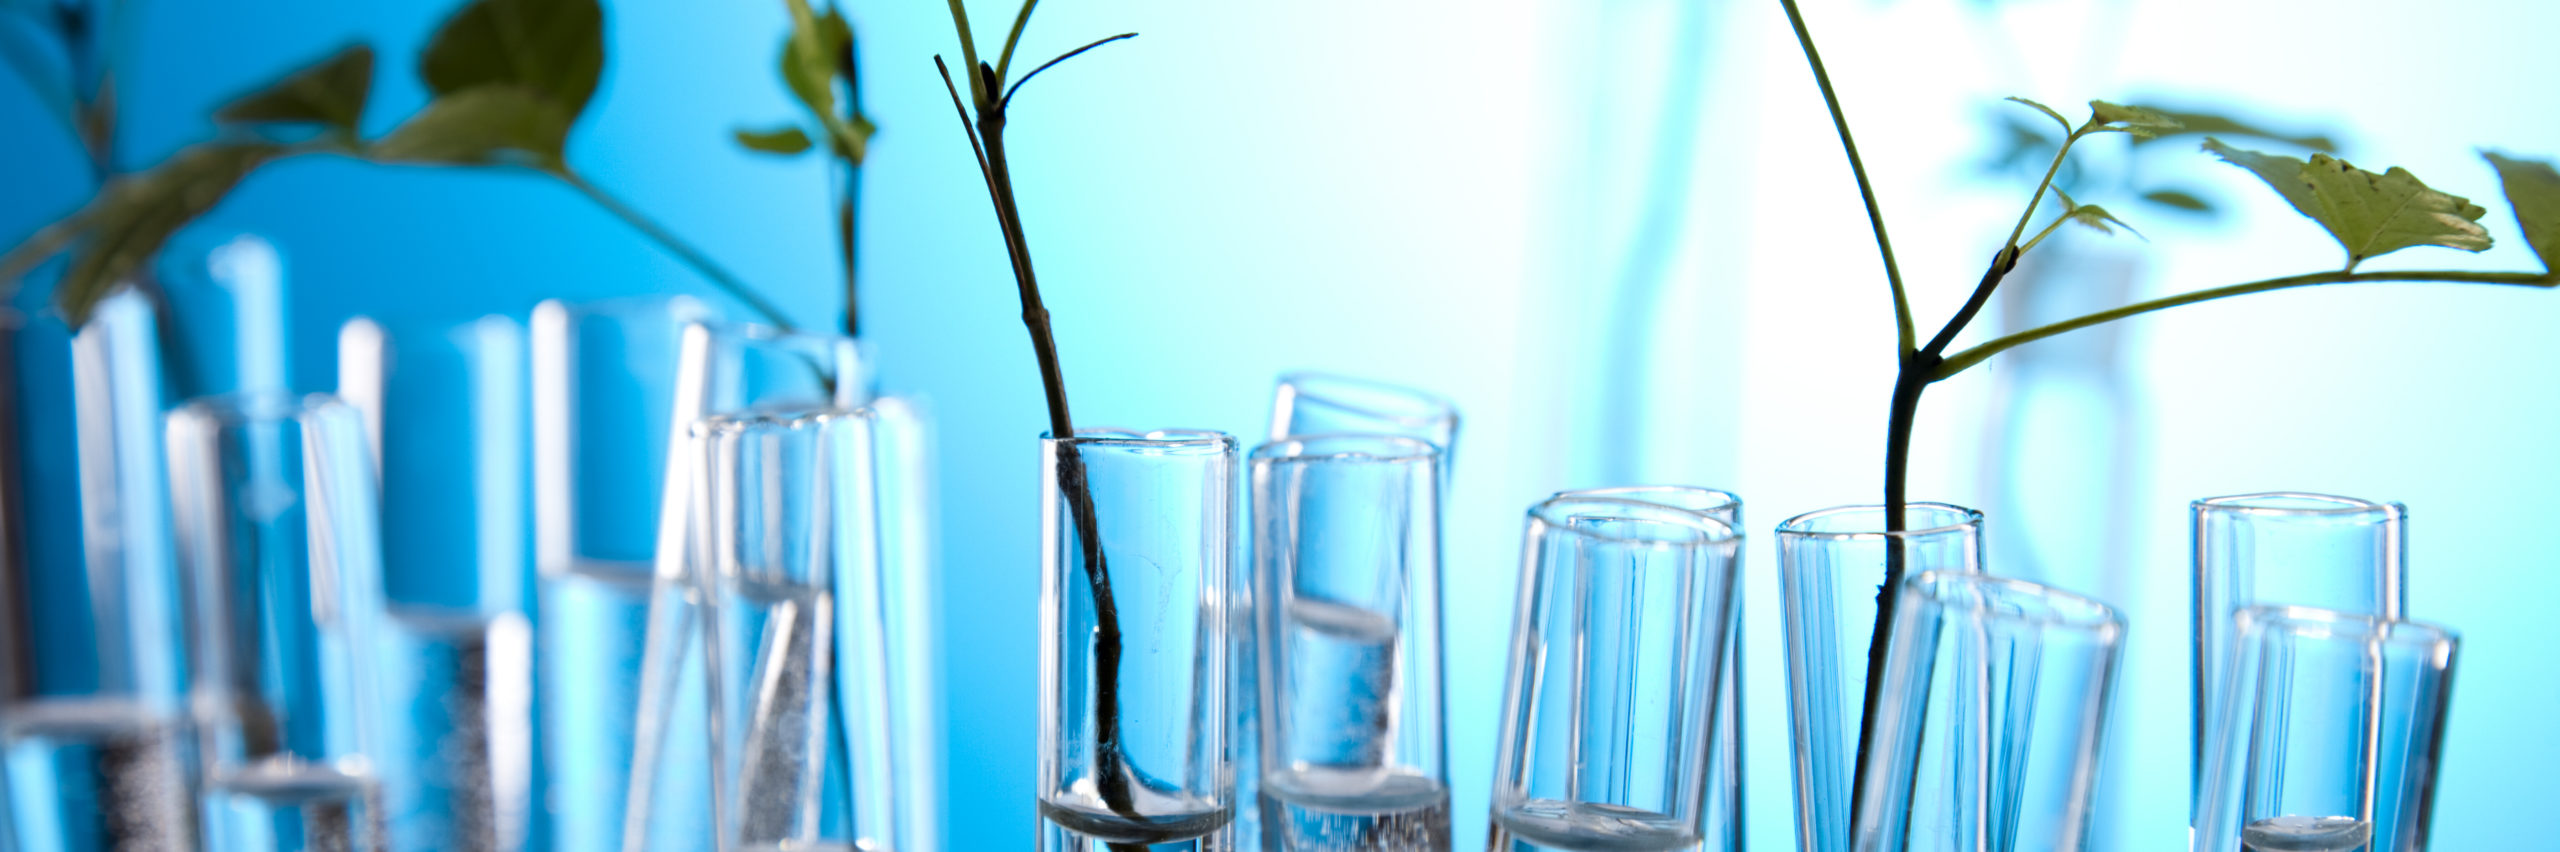 Floral science in laboratory - Image [shutterstock]